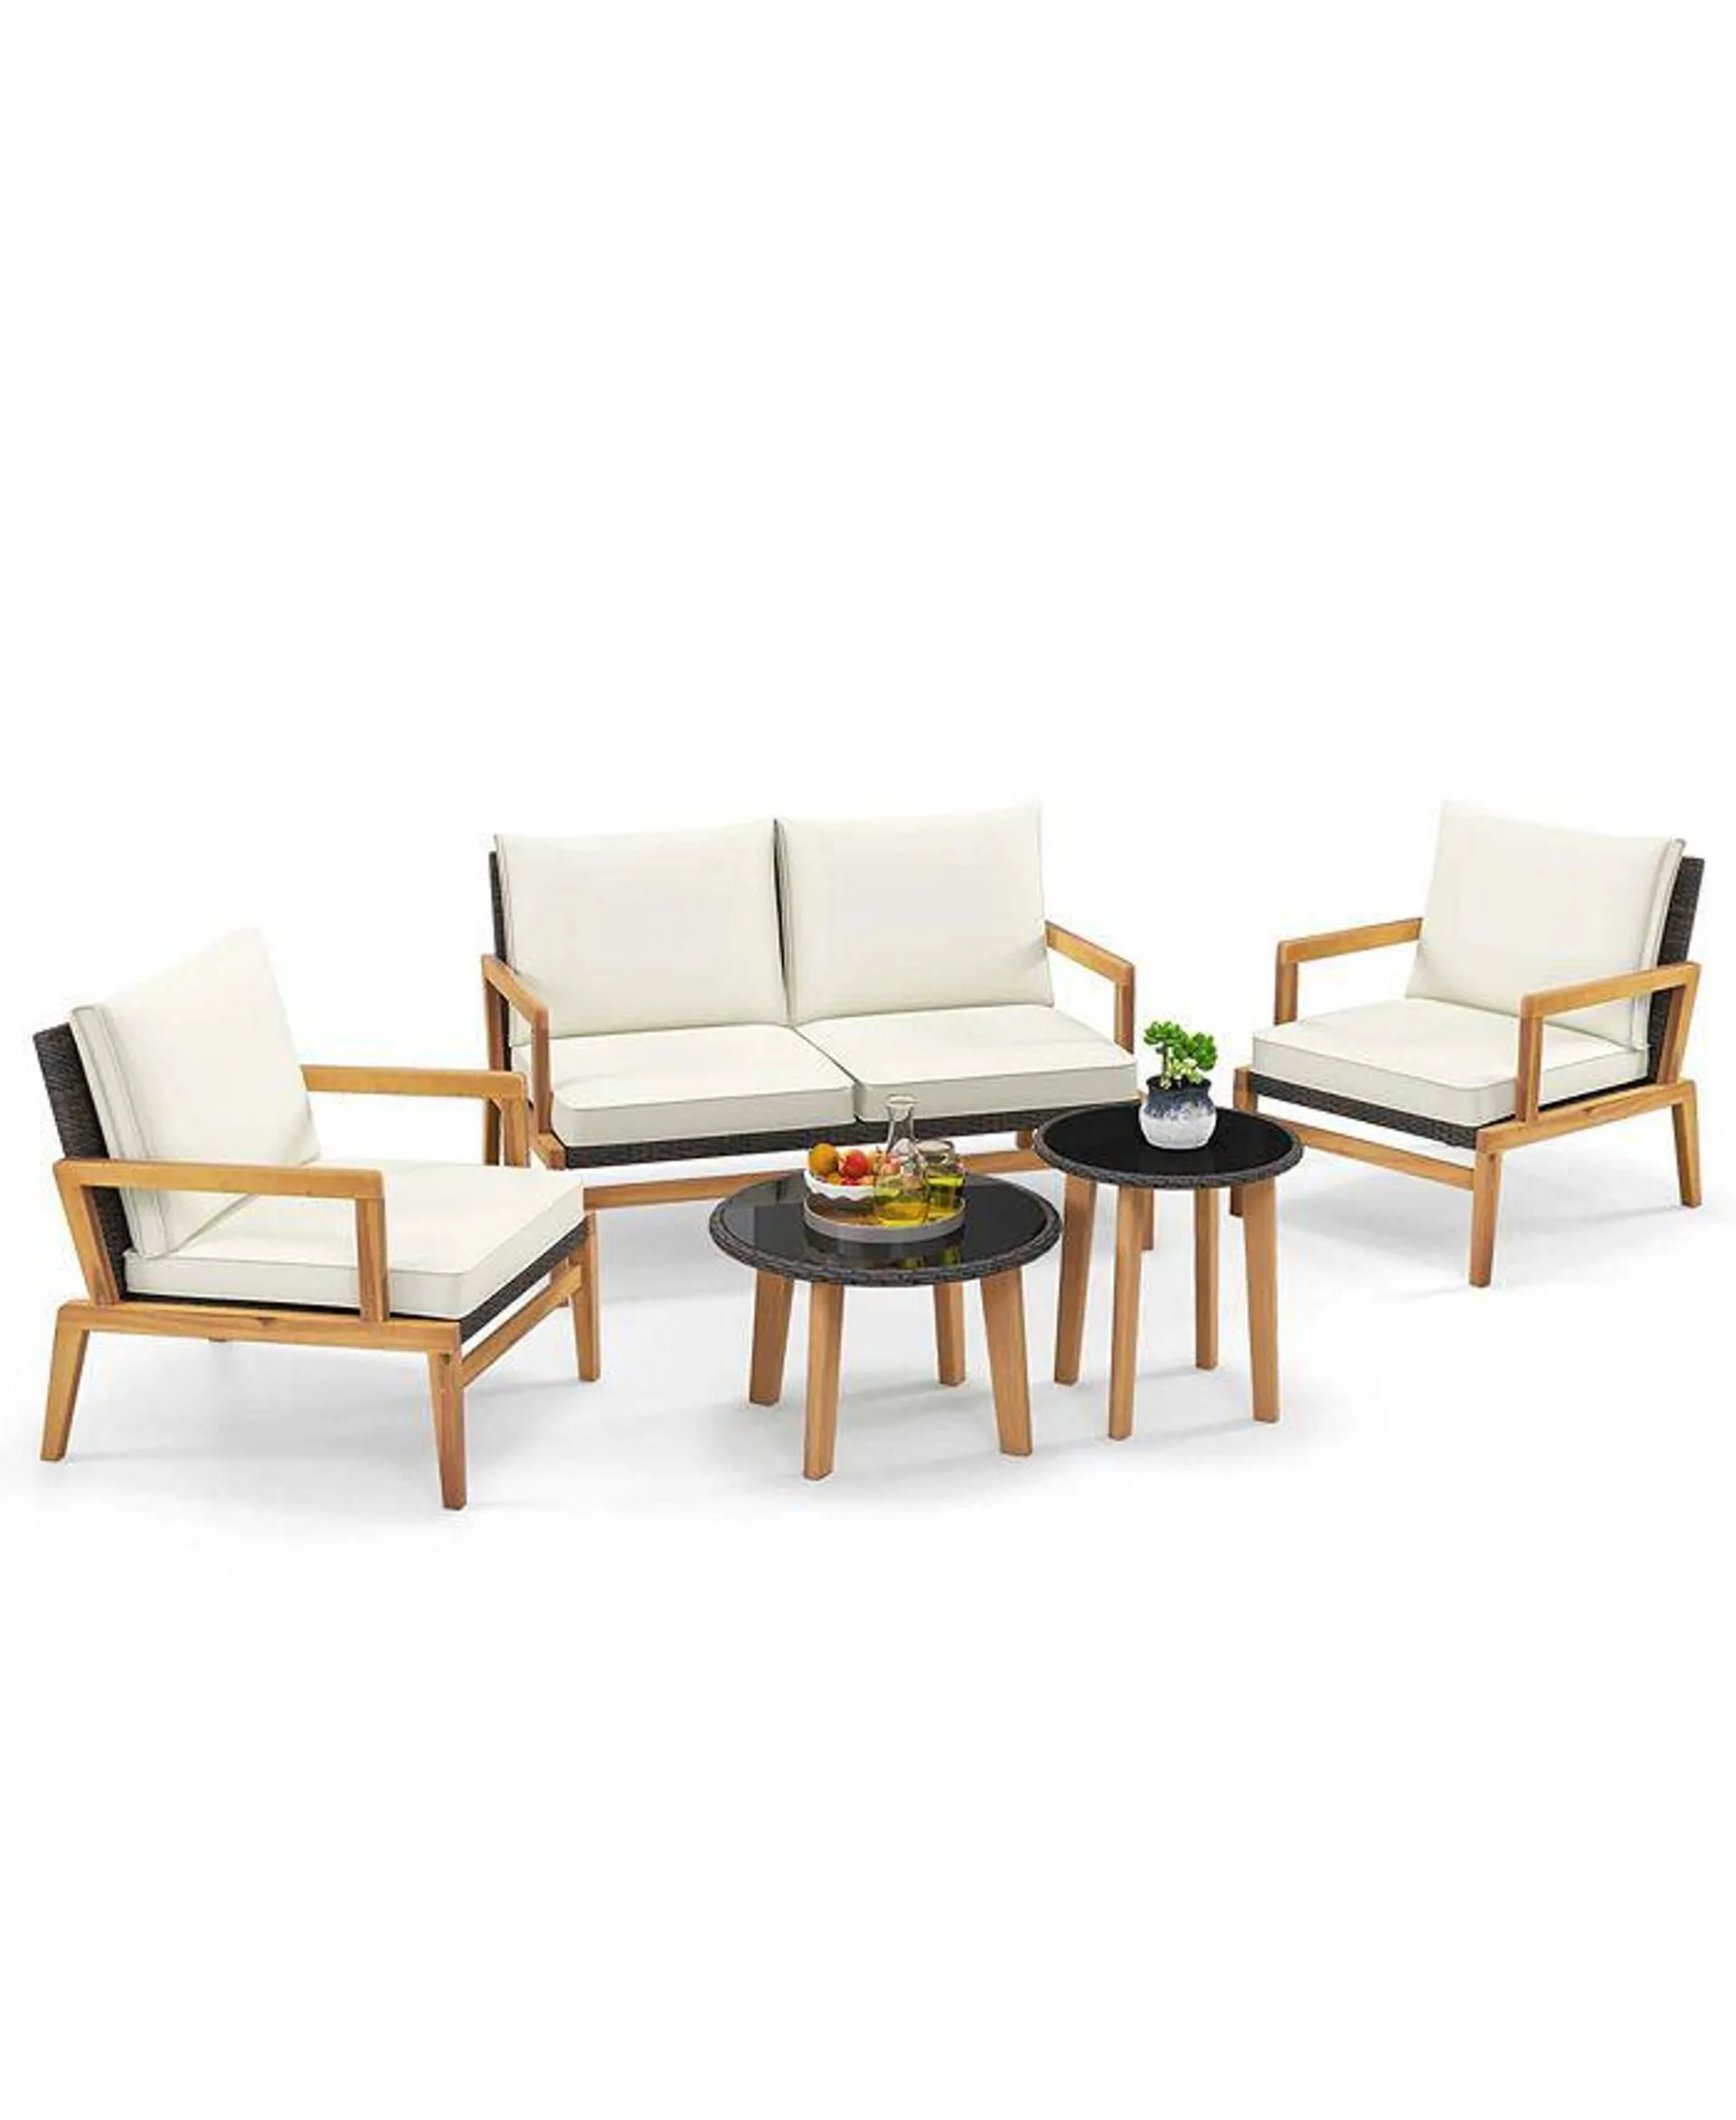 5 Piece Rattan Furniture Set Wicker Woven Sofa Set with Solid Acacia Wood Frame